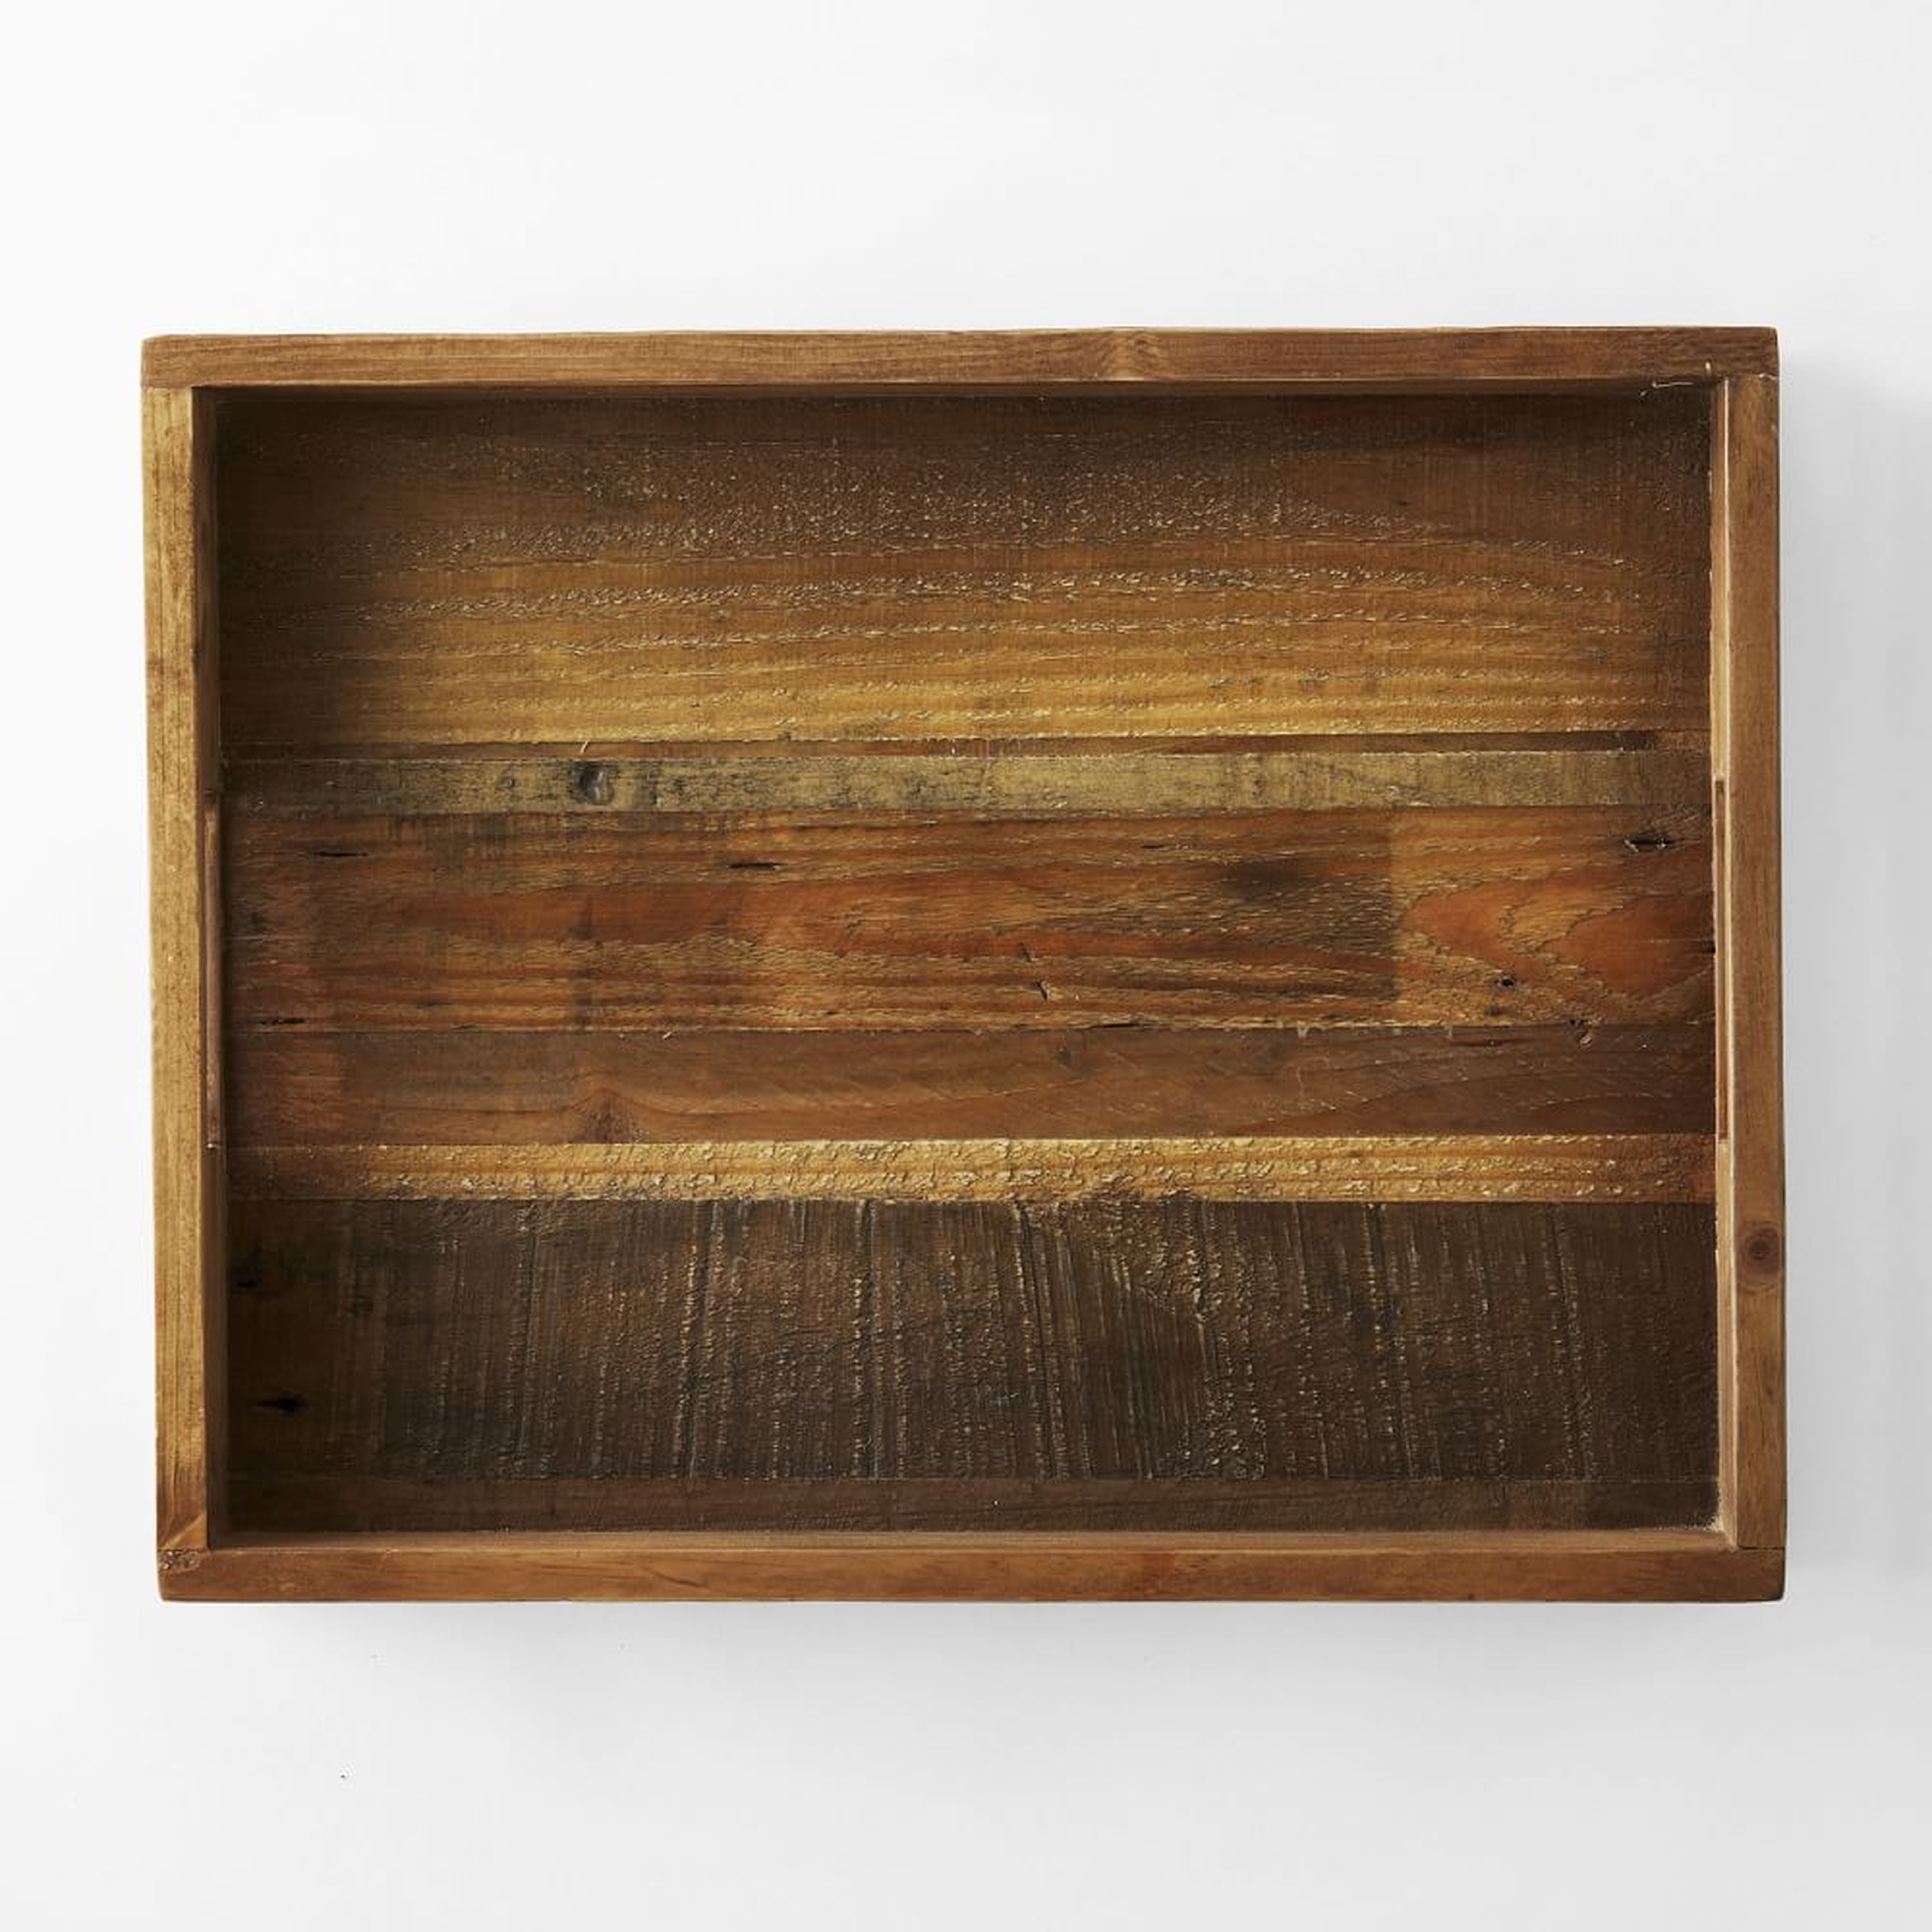 Reclaimed Wood Tray, Natural, 14"x18" - West Elm